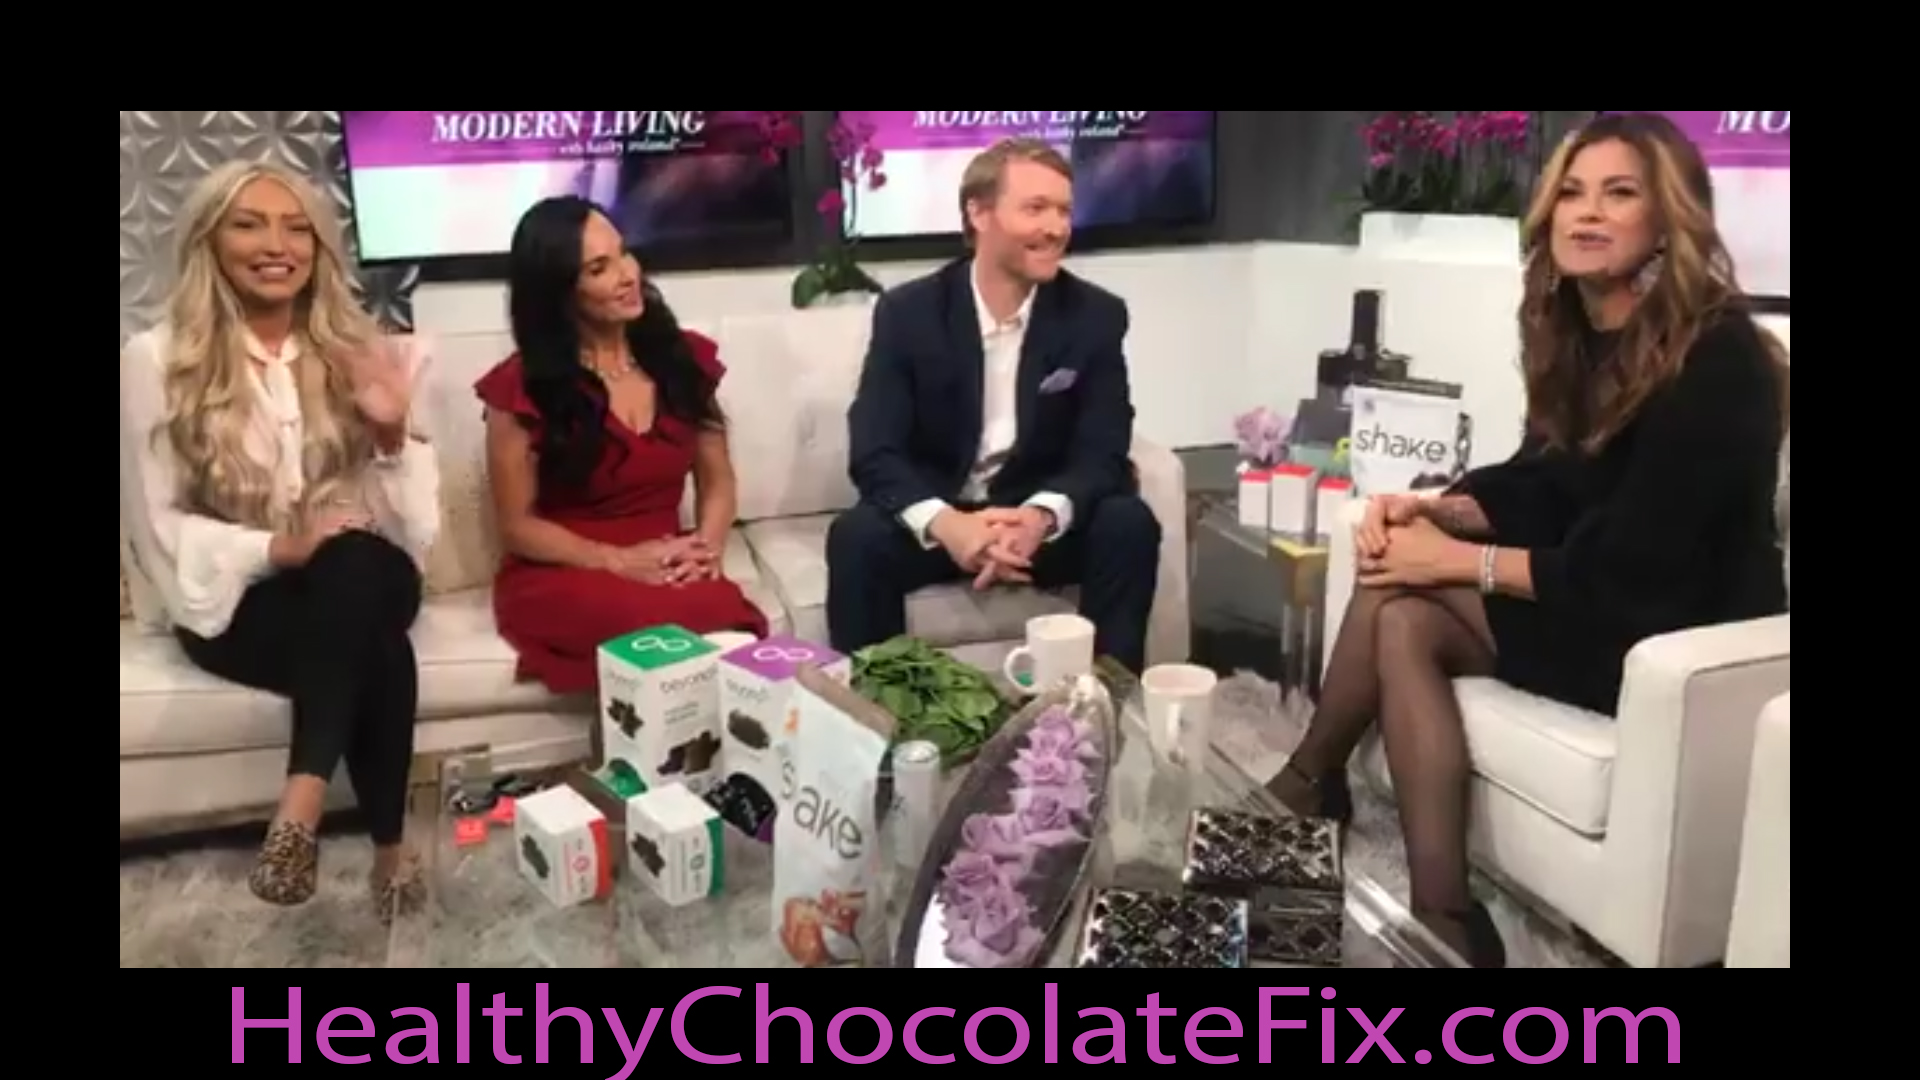 Well Beyond Healthy Chocolate Made It On The Kathy Ireland Show